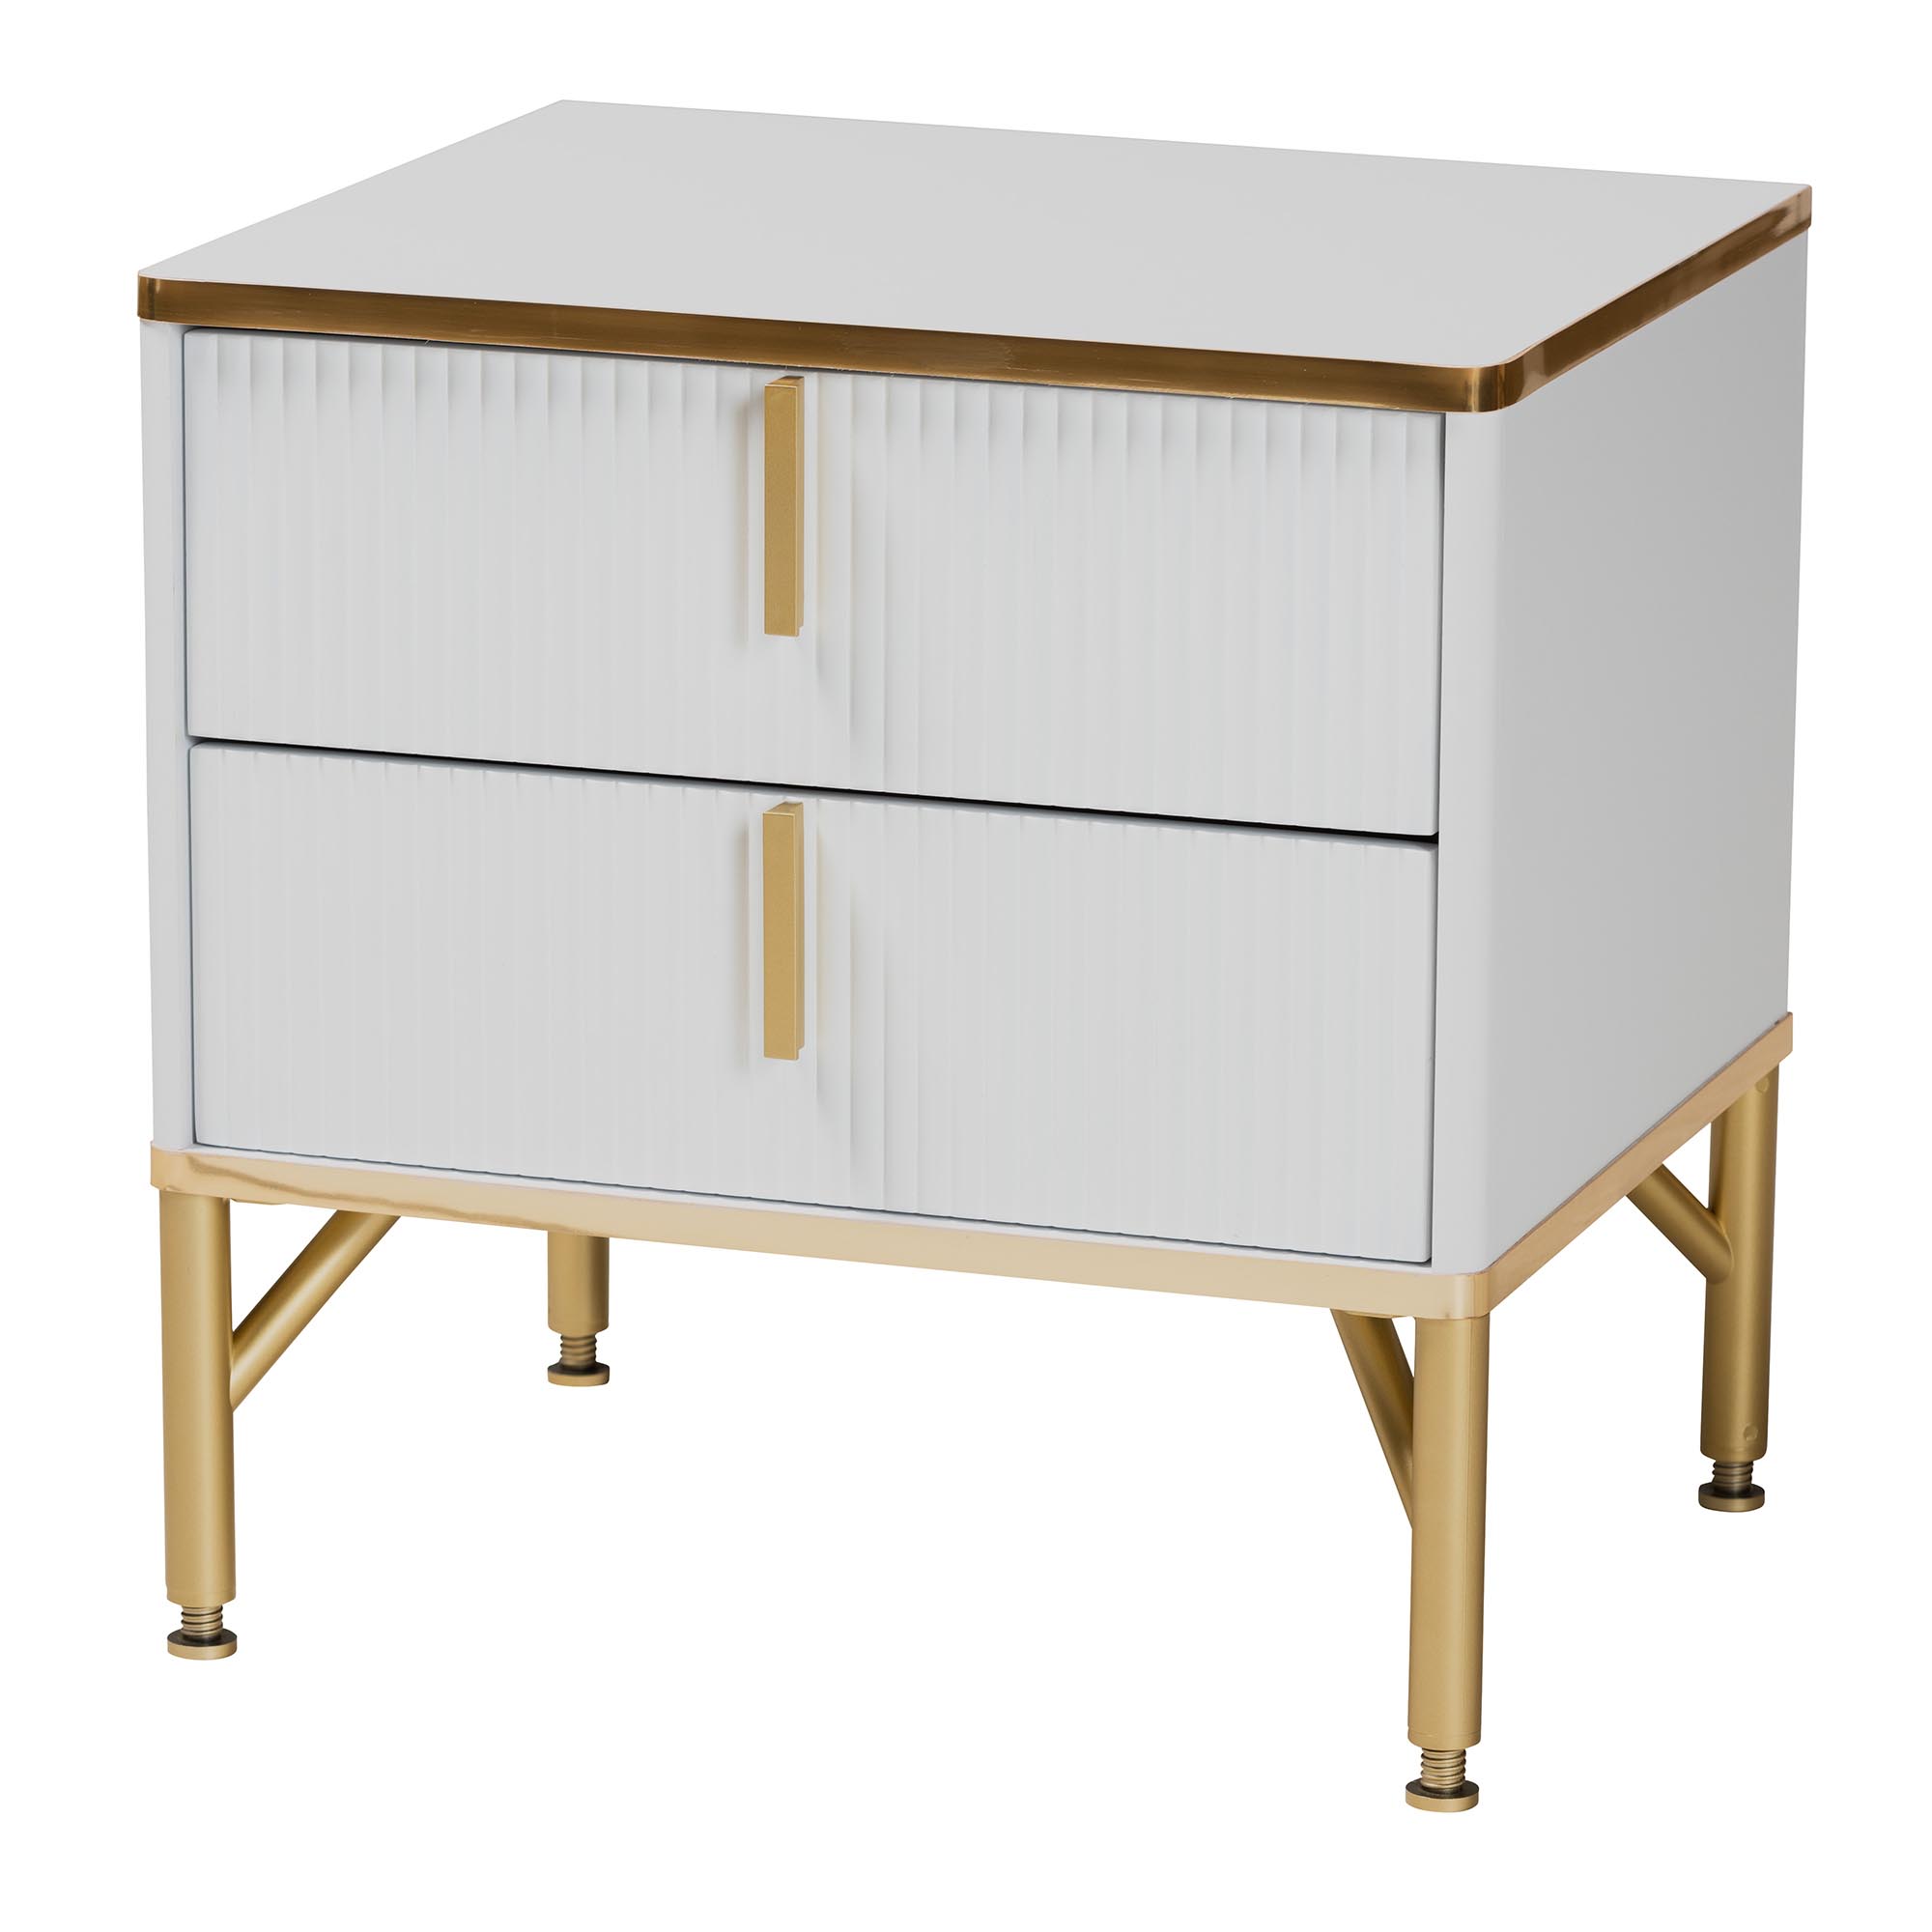 Modern Wood Nightstand with Gold Legs 2-Drawer Bedside Table in White